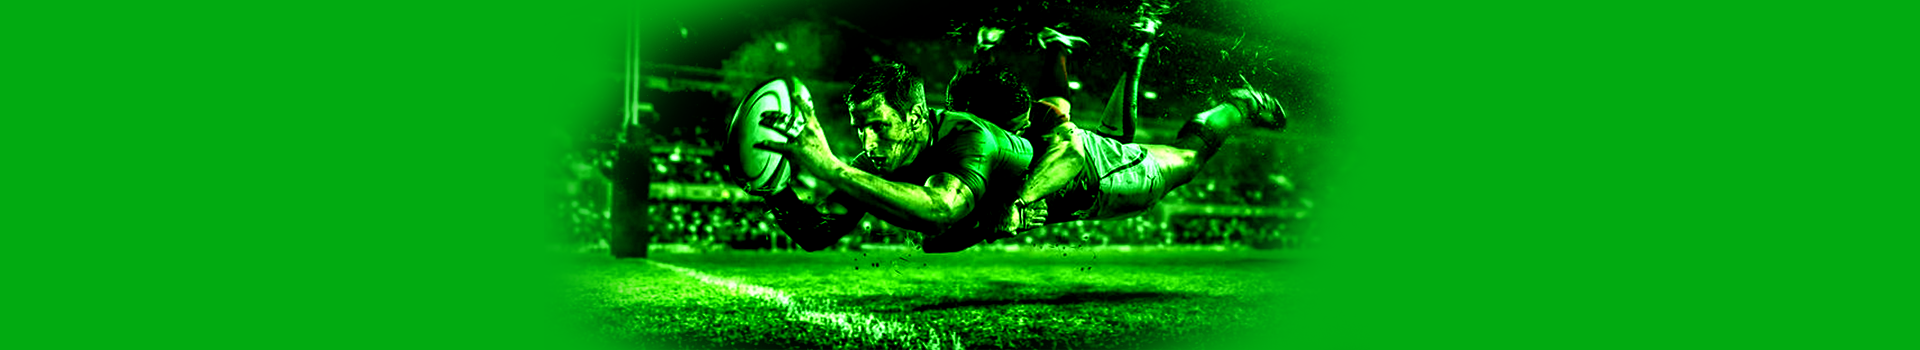 ANIMATIONS RUGBY